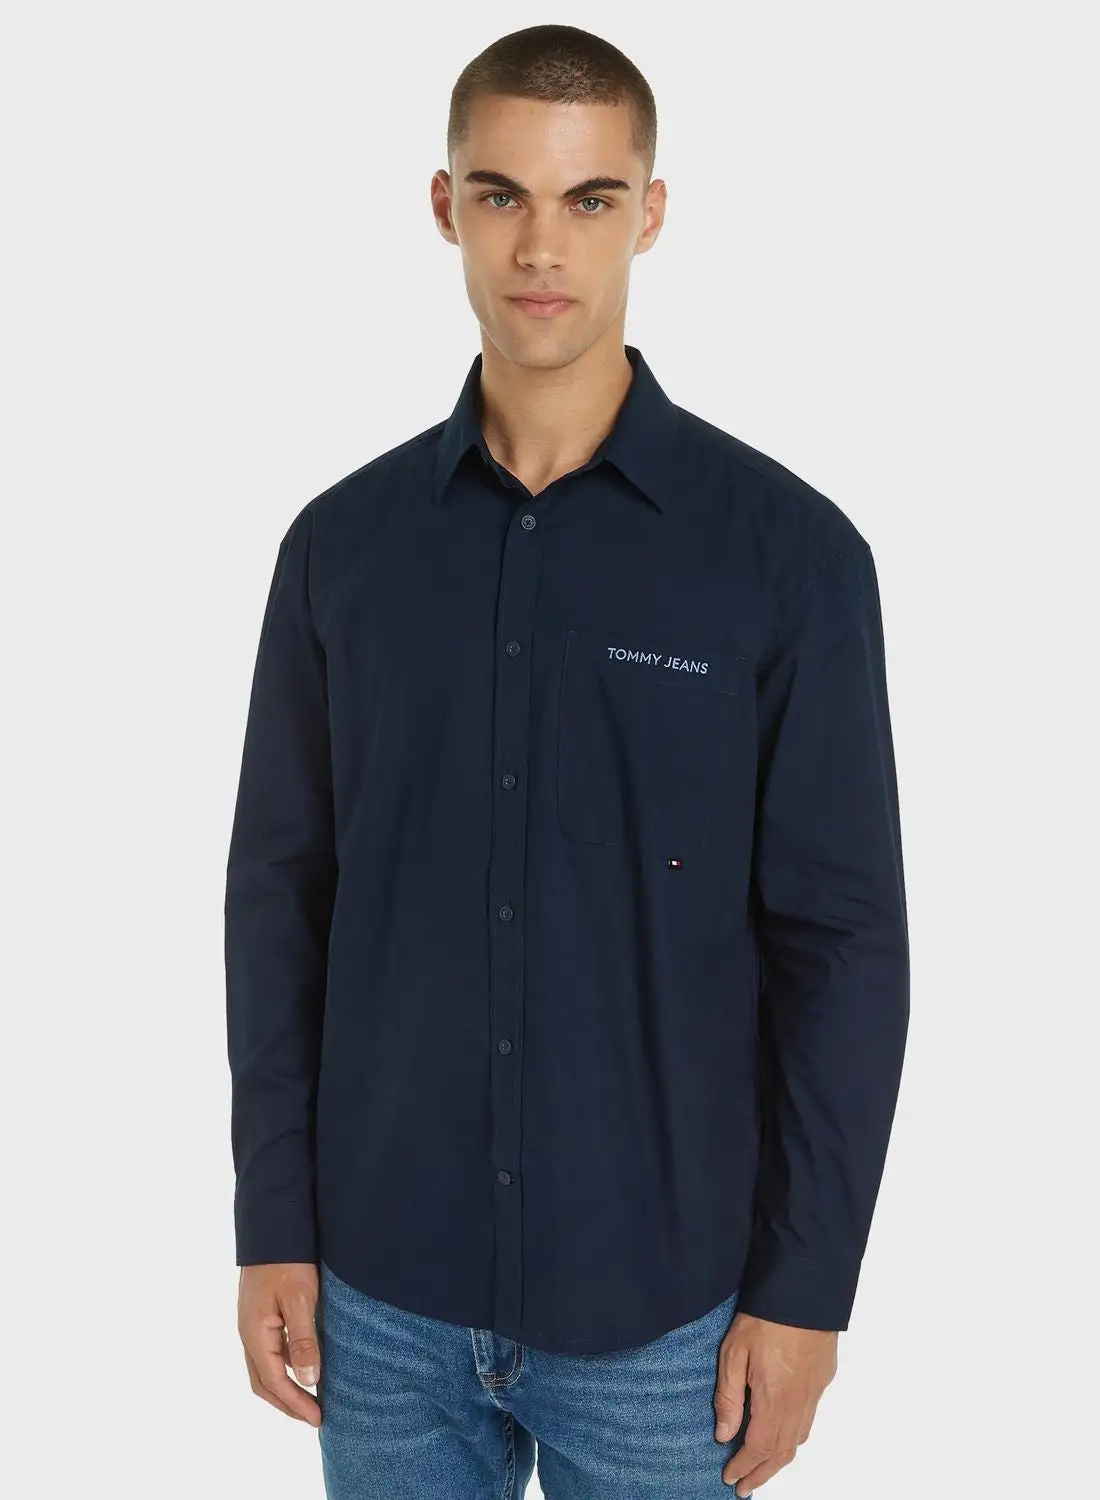 TOMMY JEANS Essential Relax Fit Shirt